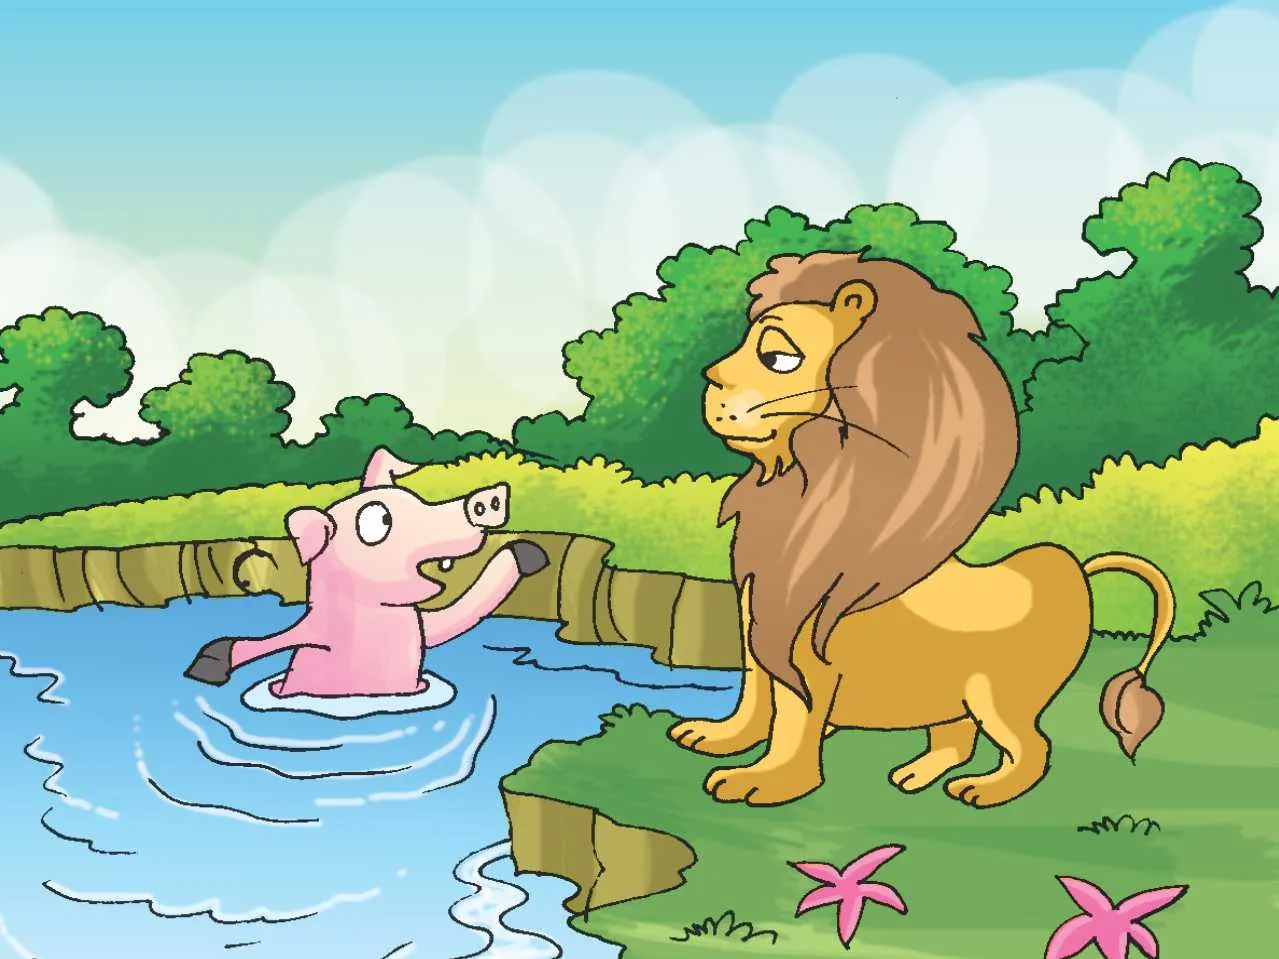 Lion and a piglet cartoon image